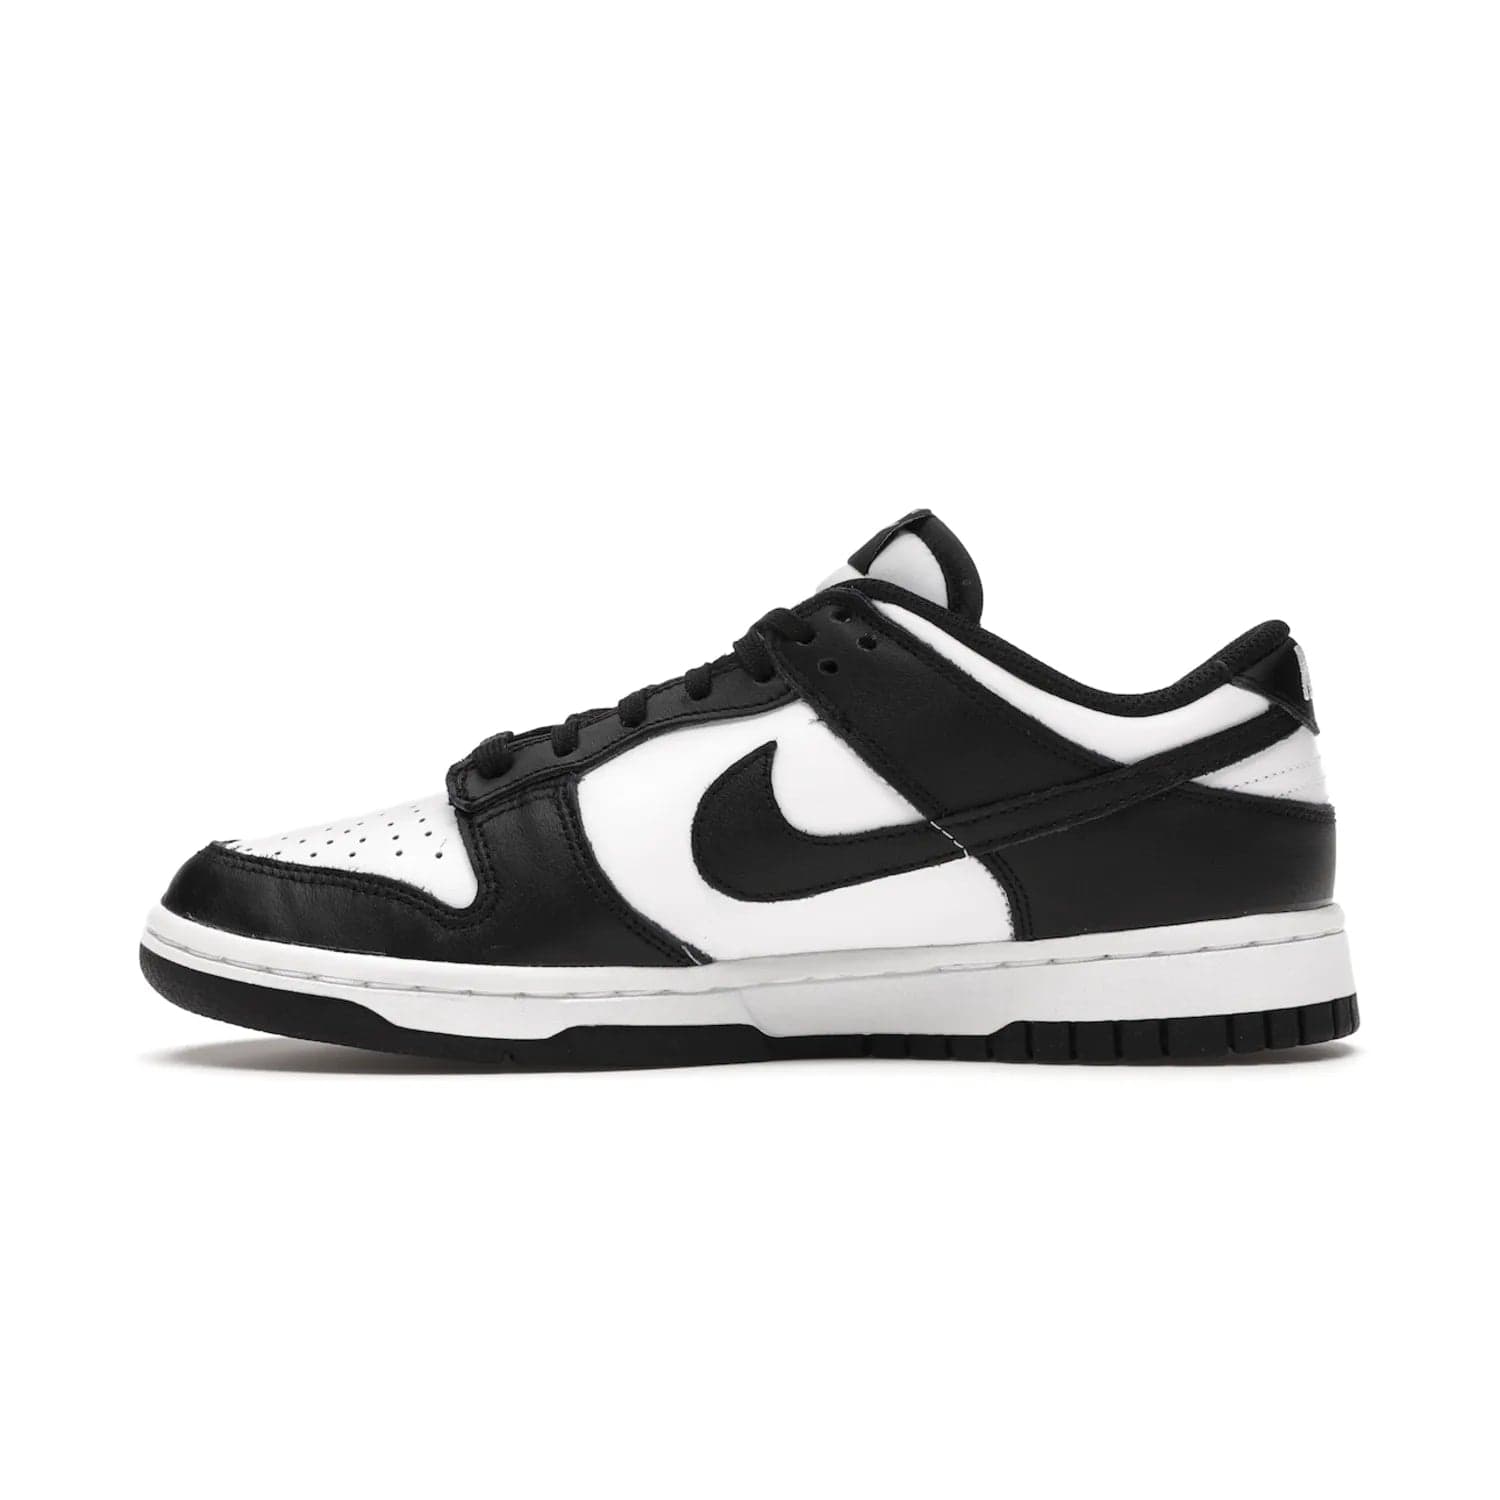 Nike Dunk Low Retro White Black Panda (2021) (Women's) - Image 19 - Only at www.BallersClubKickz.com - Say hello to the new Nike Dunk Low Retro White Black Panda (2021) (Women's)! White & black leather upper with Nike Swoosh logo. Get your pair for $100 in March 2021! Shop now!